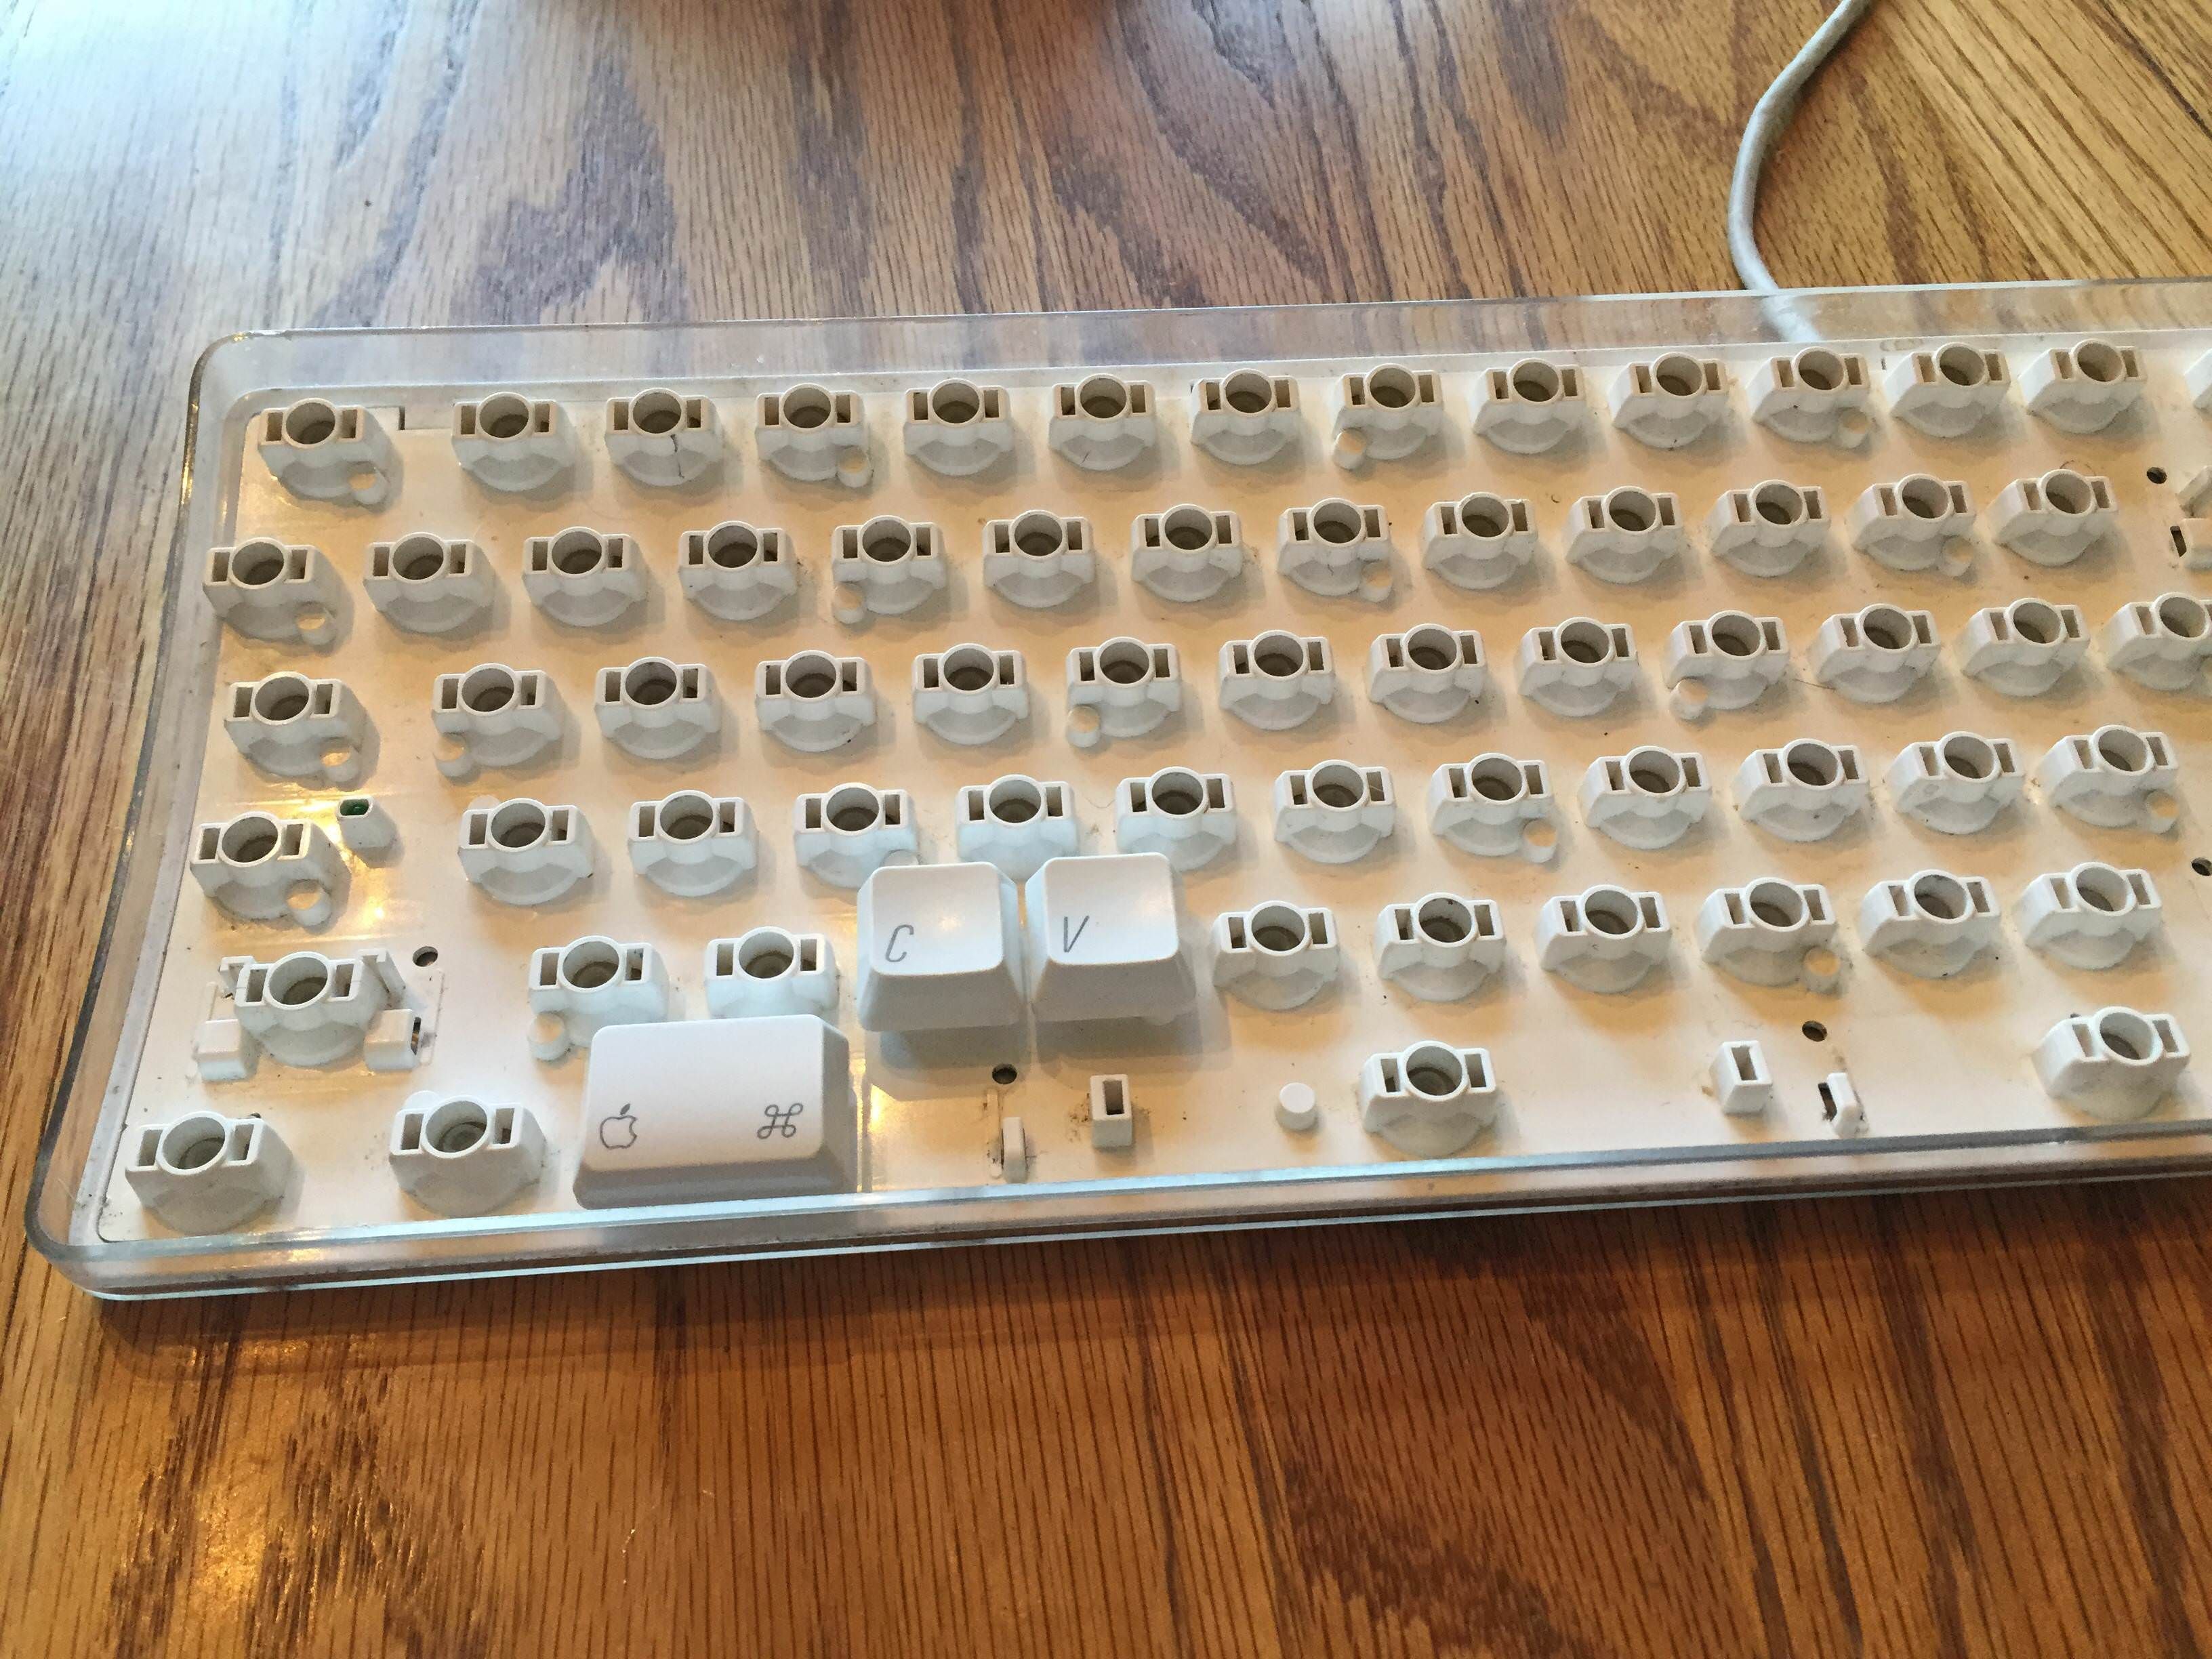 A keyboard from the BuzzFeed office.